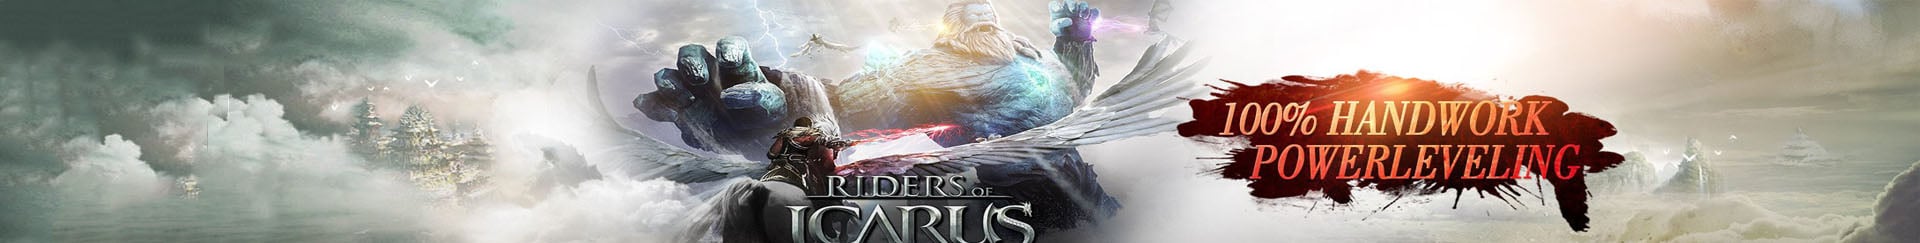 Riders of Icarus power leveling